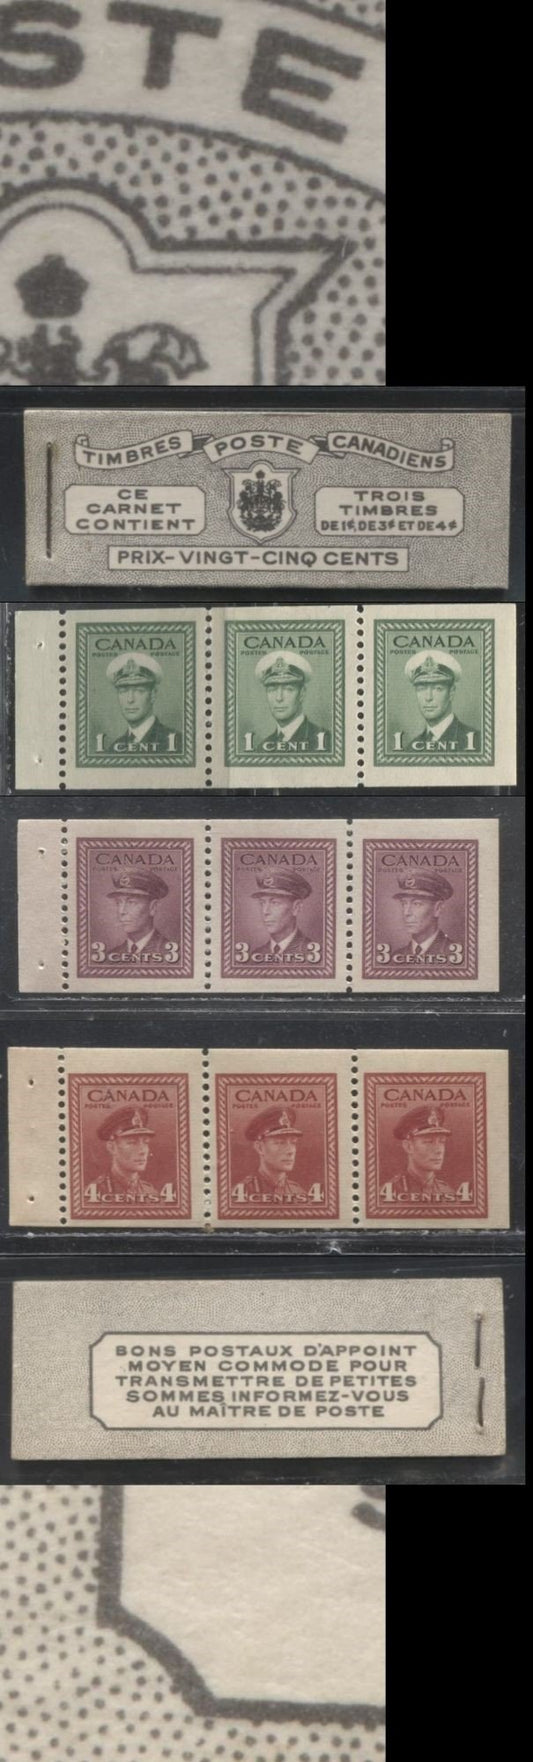 Lot 203 Canada #BK38a 1942-1949 War Issue Complete 25c, French Booklet Containing 1 Pane Each of 3 of 1c Green, 3c Rosy Plum and 4c Carmine Red, Harris Front Cover Type Vc , Back Cover Jvii, 7c & 6c Rate Page